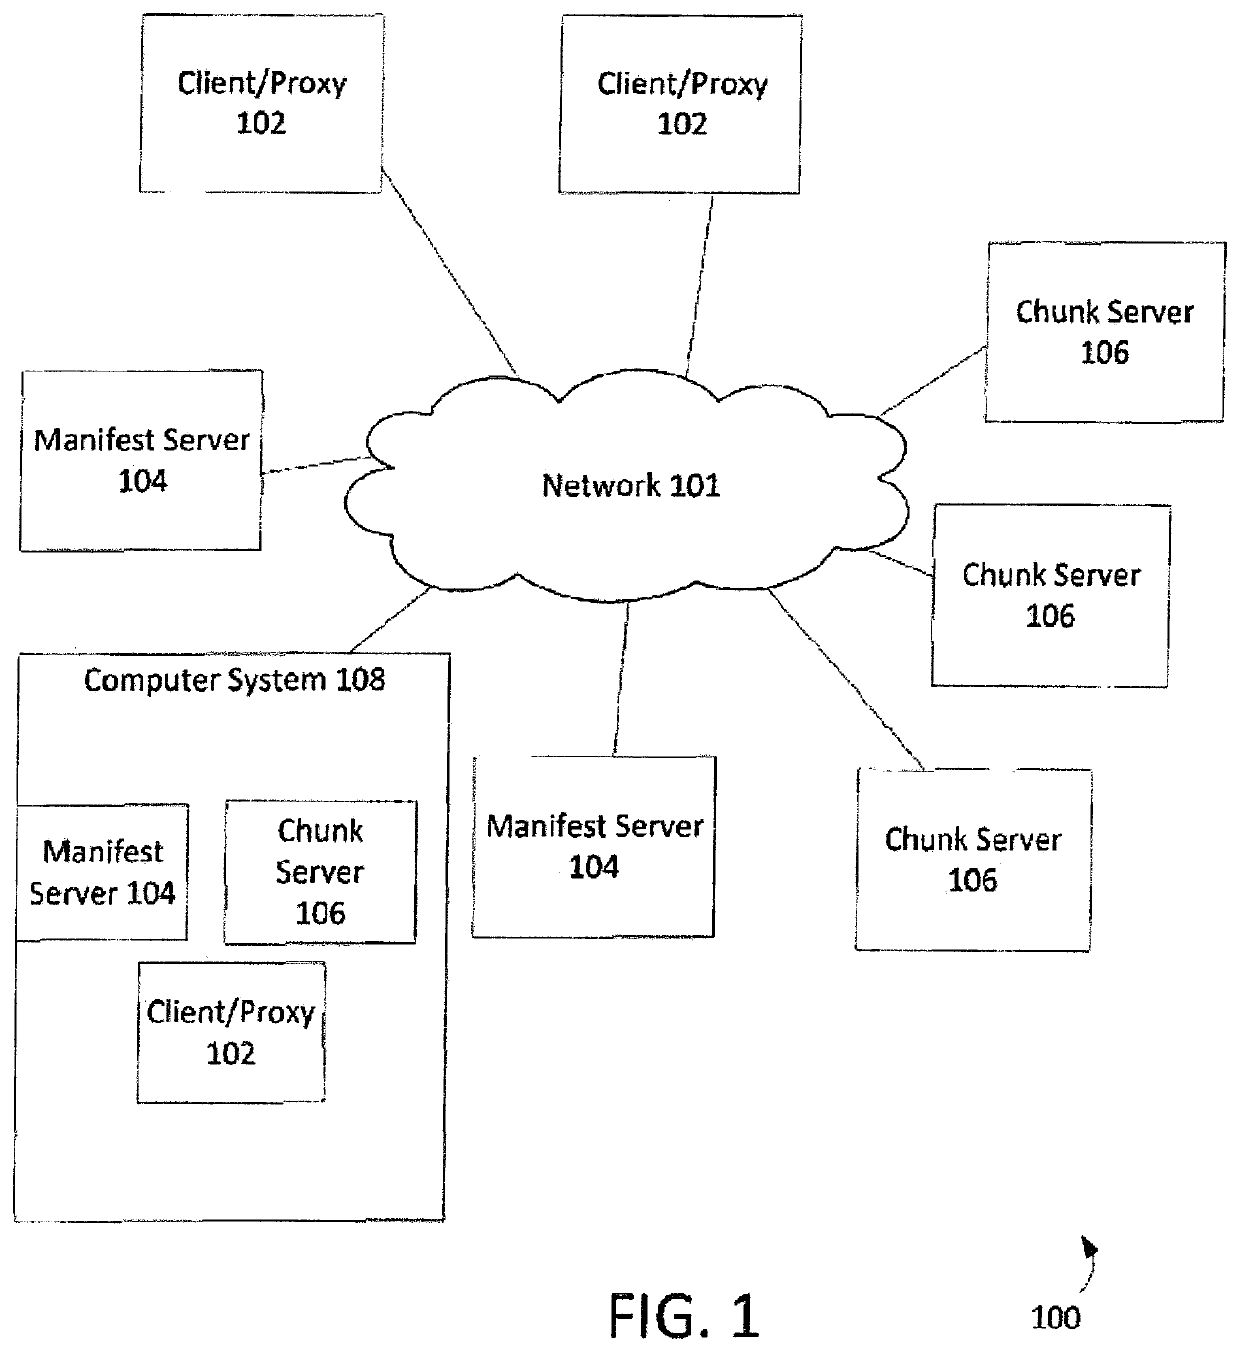 Chunk retention in a distributed object storage system using stream sessions and stream session backreferences